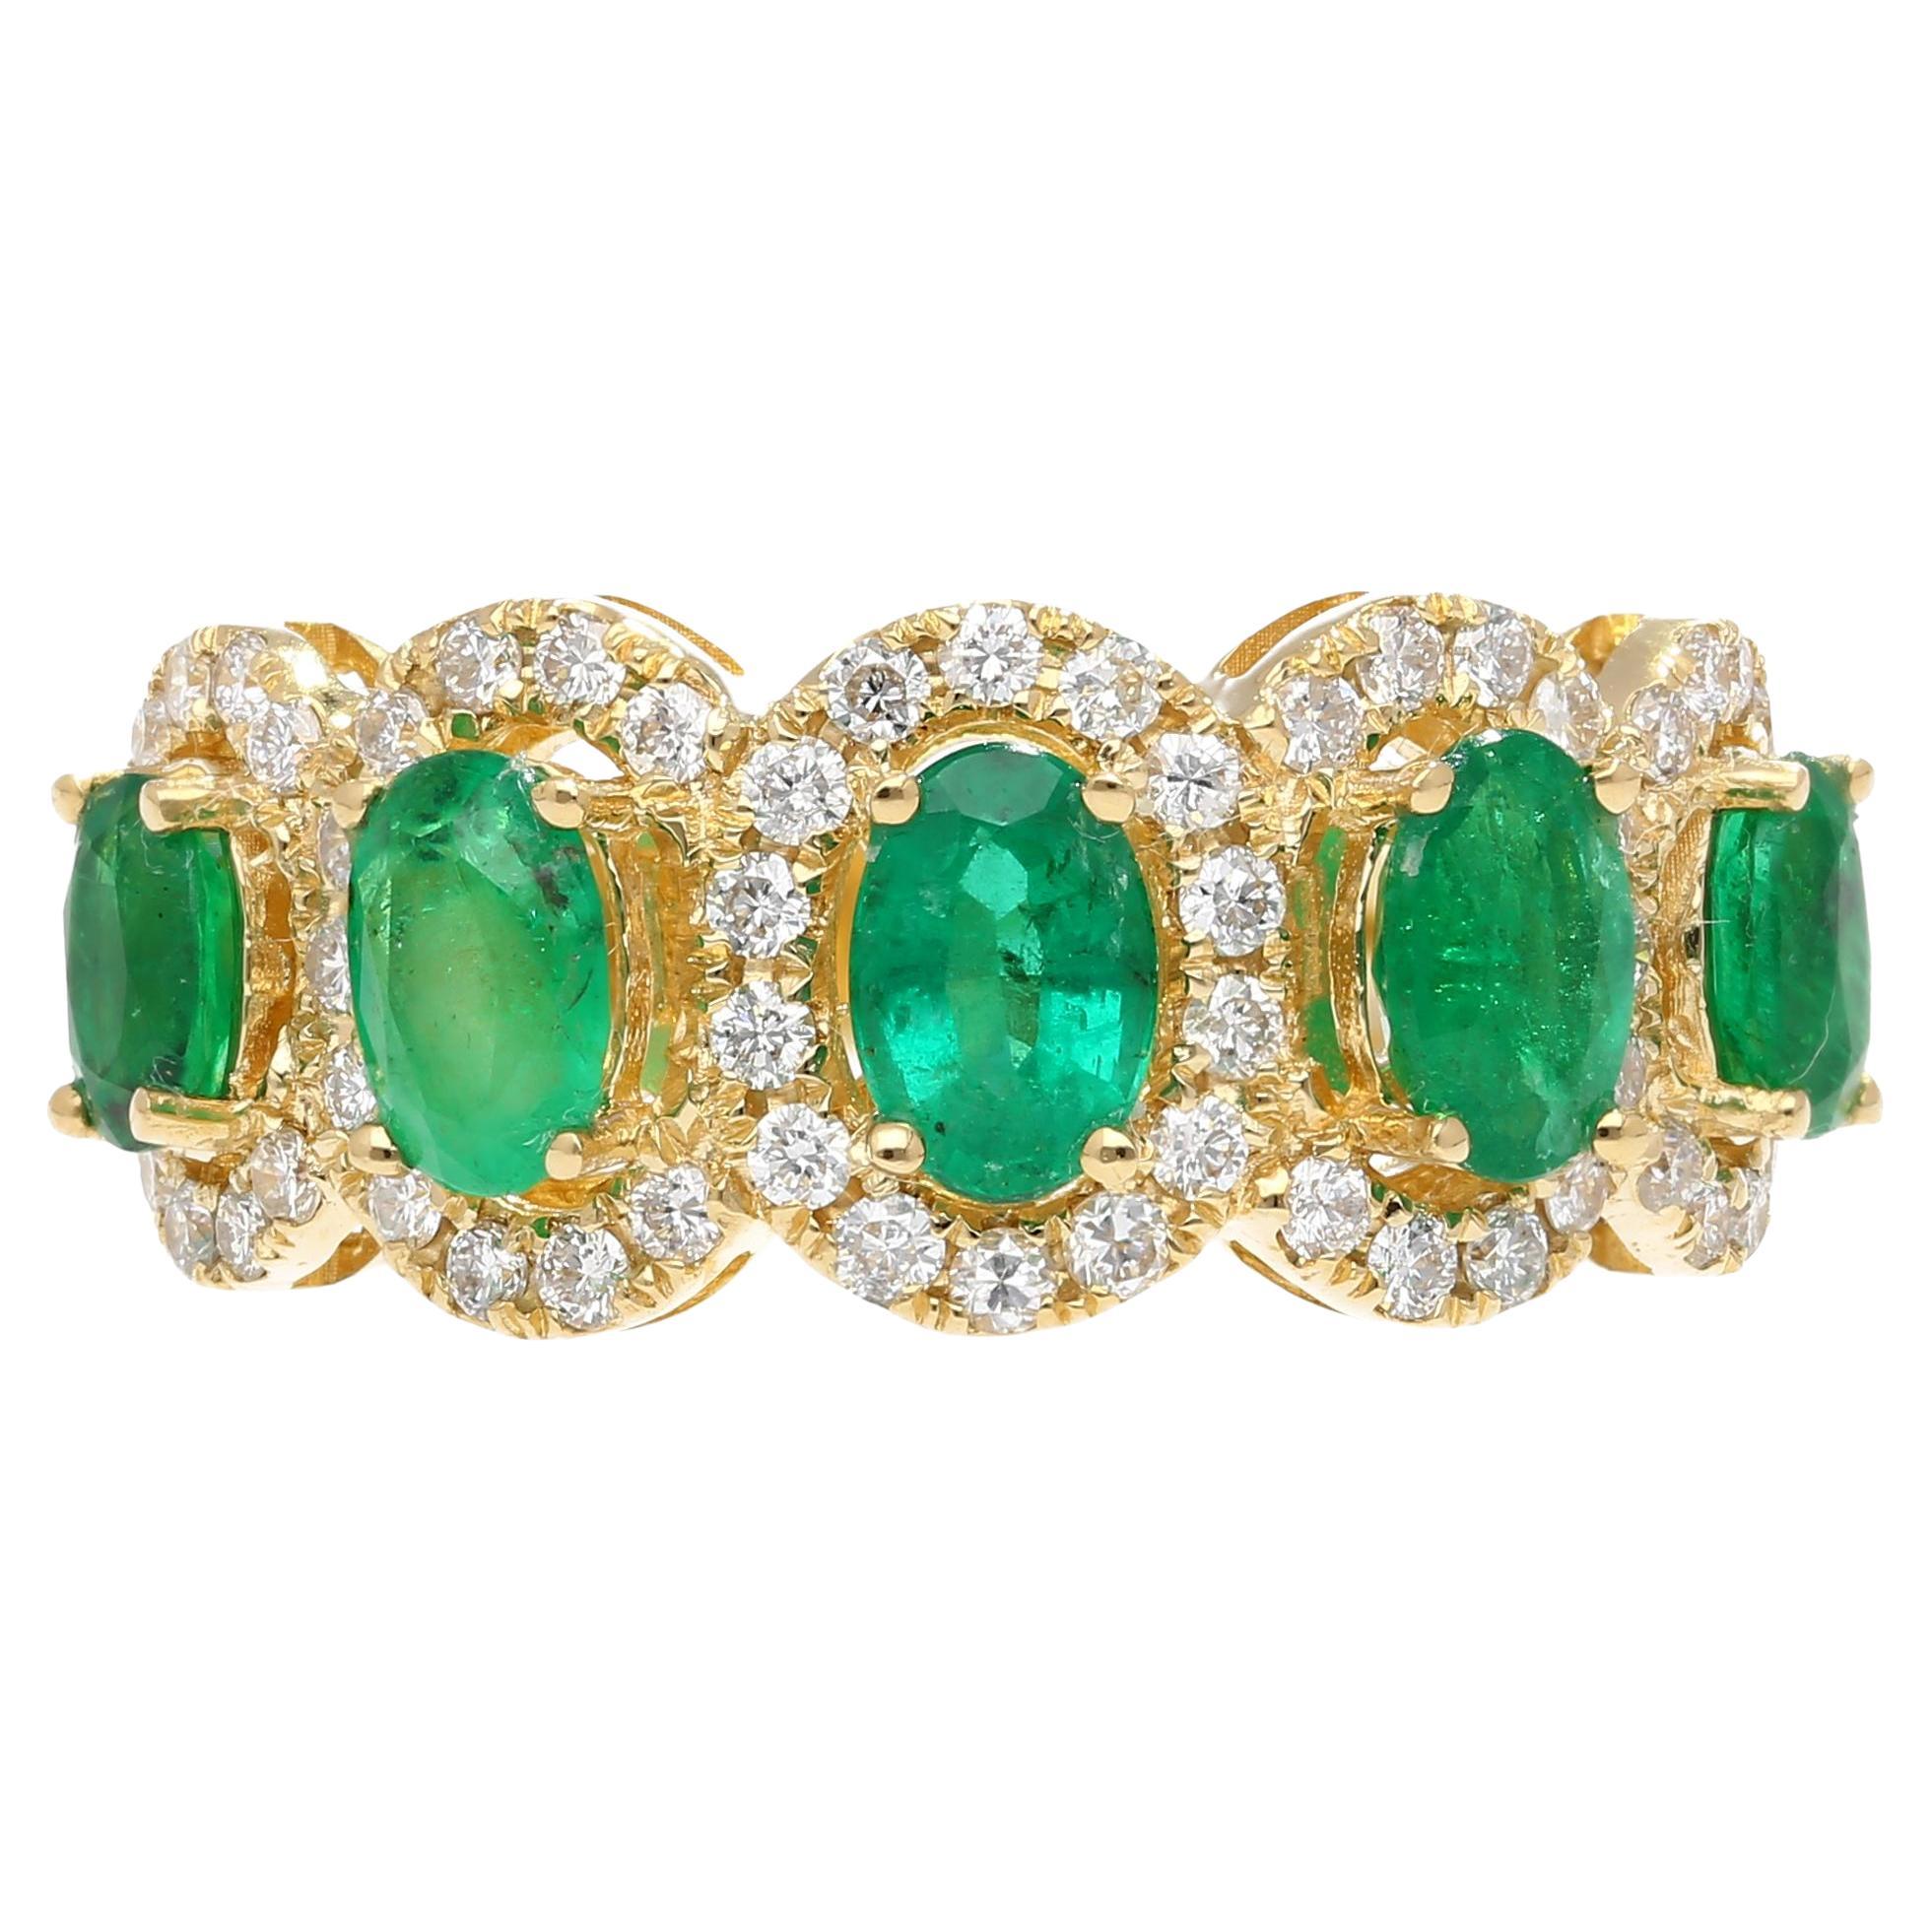 2.29 Carat Oval Cut Emerald and Diamond Wedding Band in 18K Gold For Sale